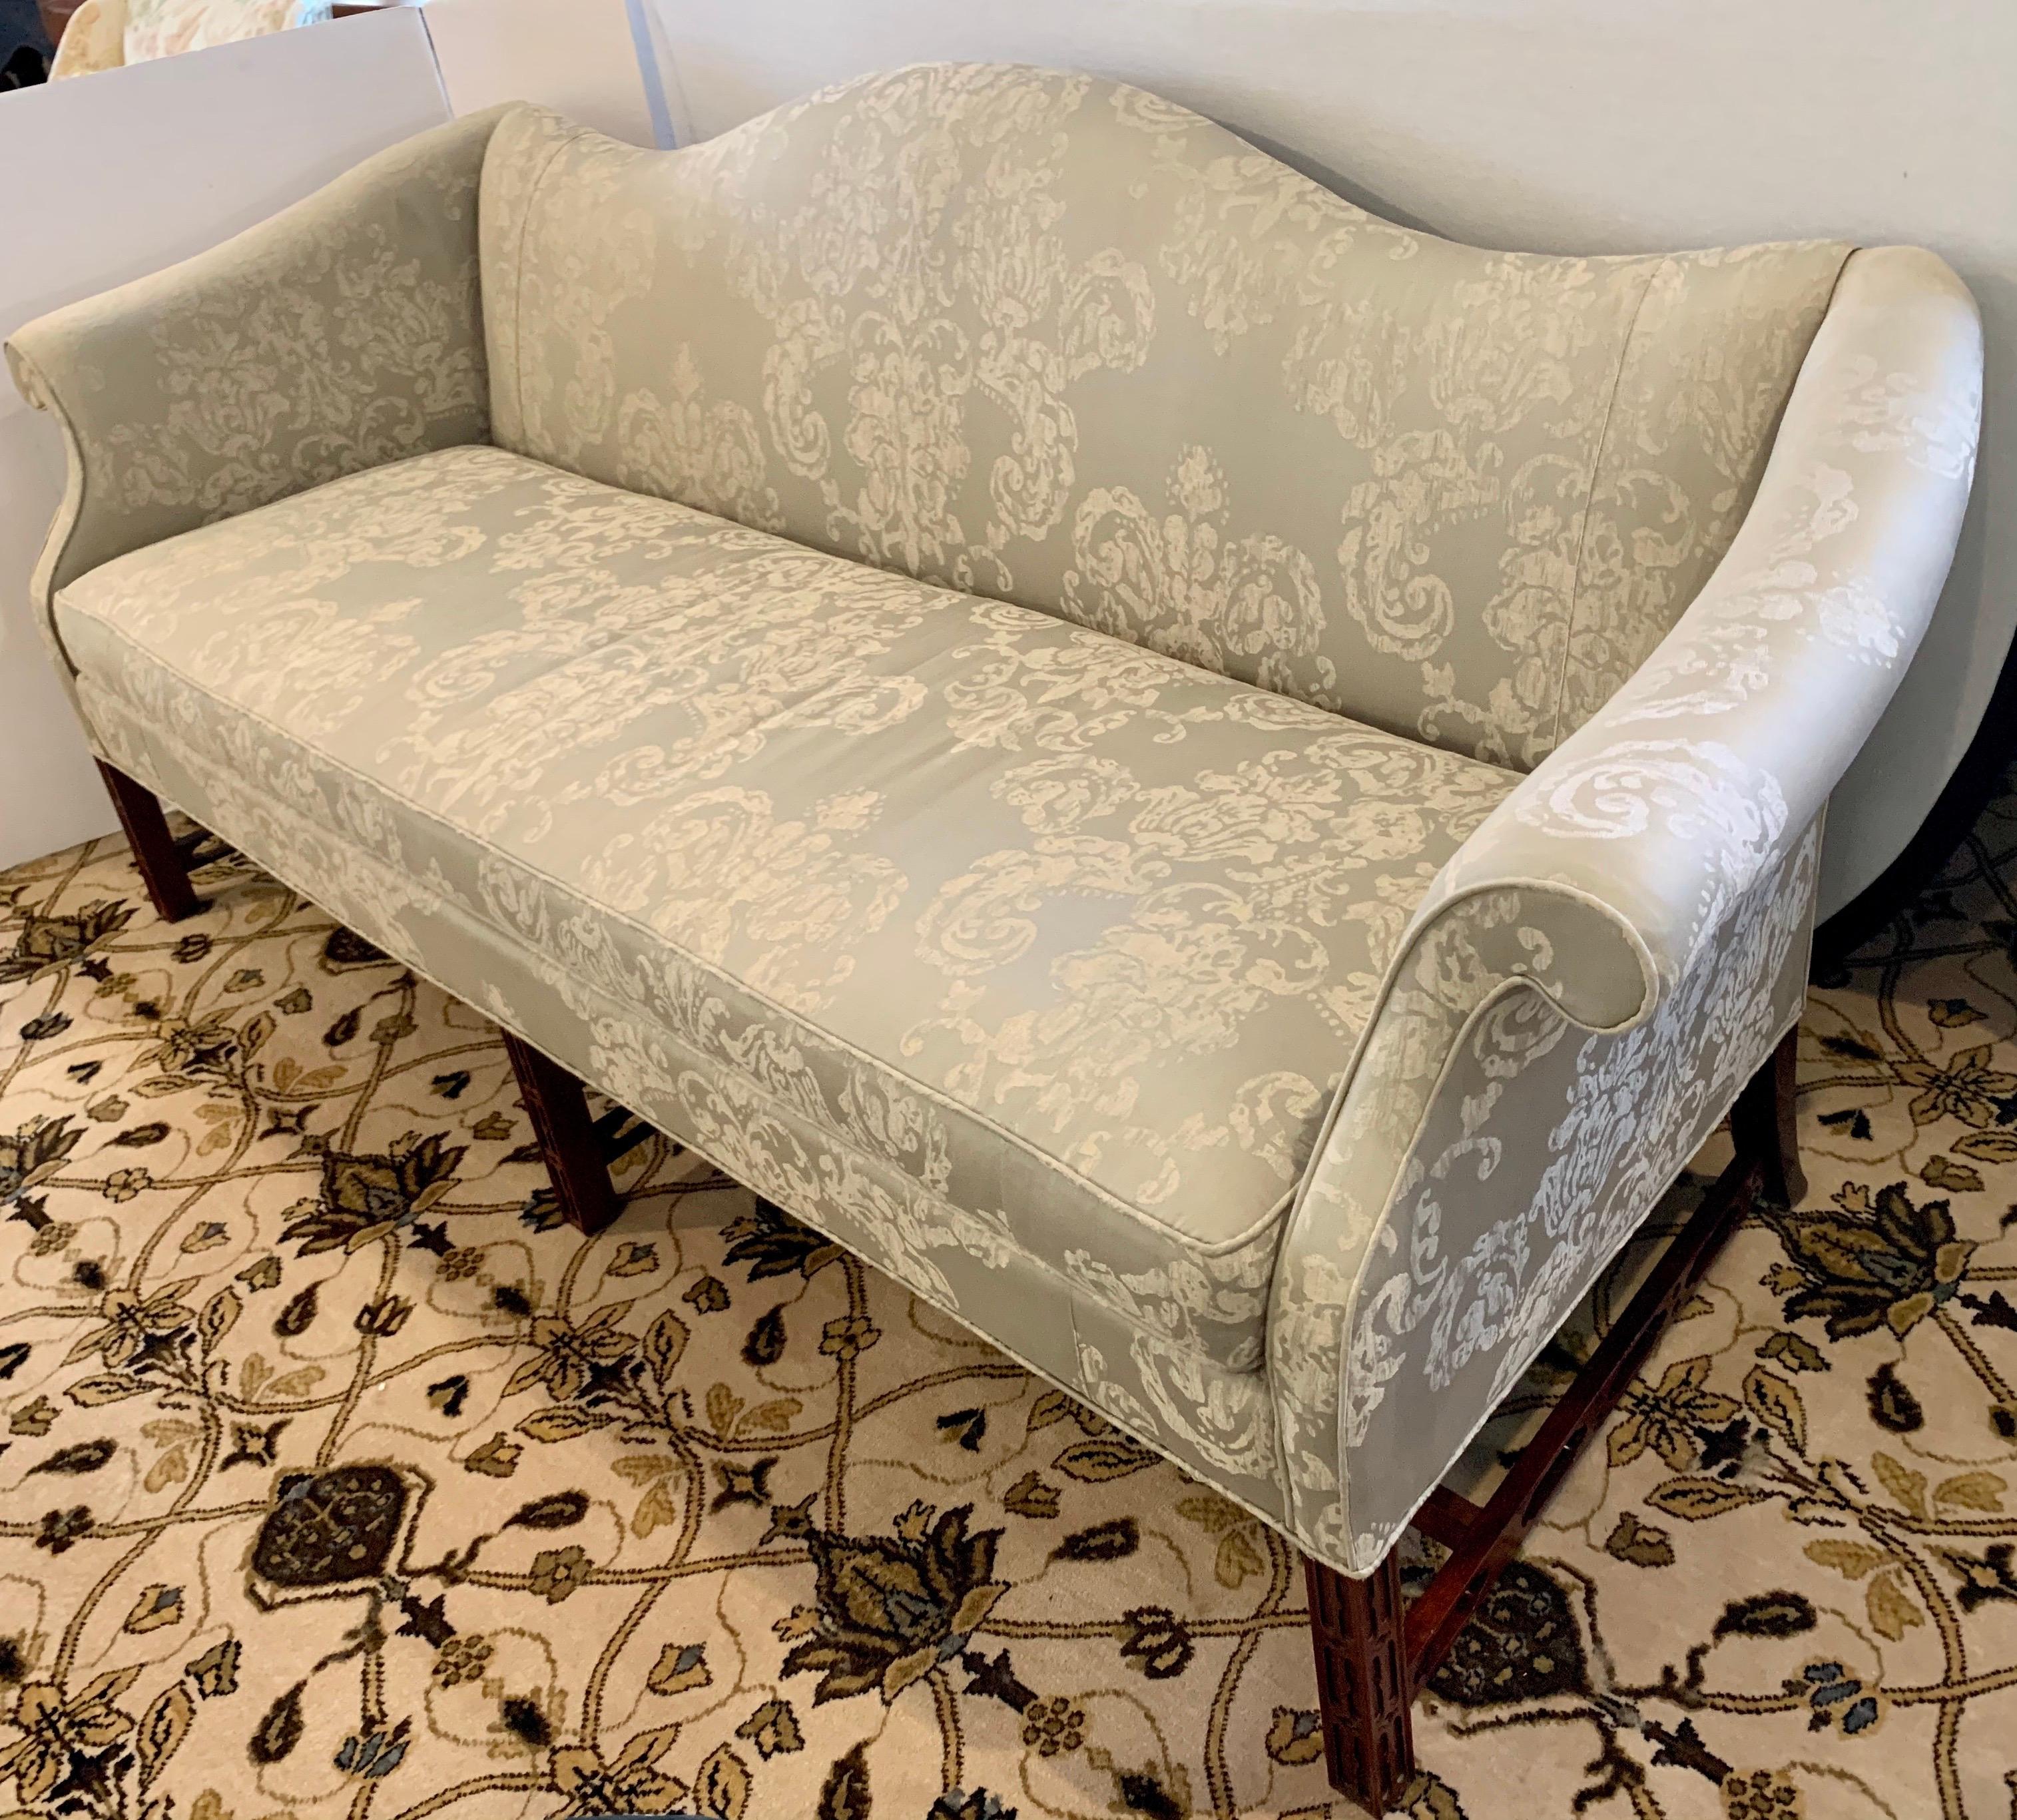 Classic and elegant Chinese Chippendale camelback sofa features a shapely mahogany frame with scrolled arms and single thick cushion. Supported by six elegant tapered legs conjoined with pierced fretwork stretchers. Upholstered in a luxurious silver